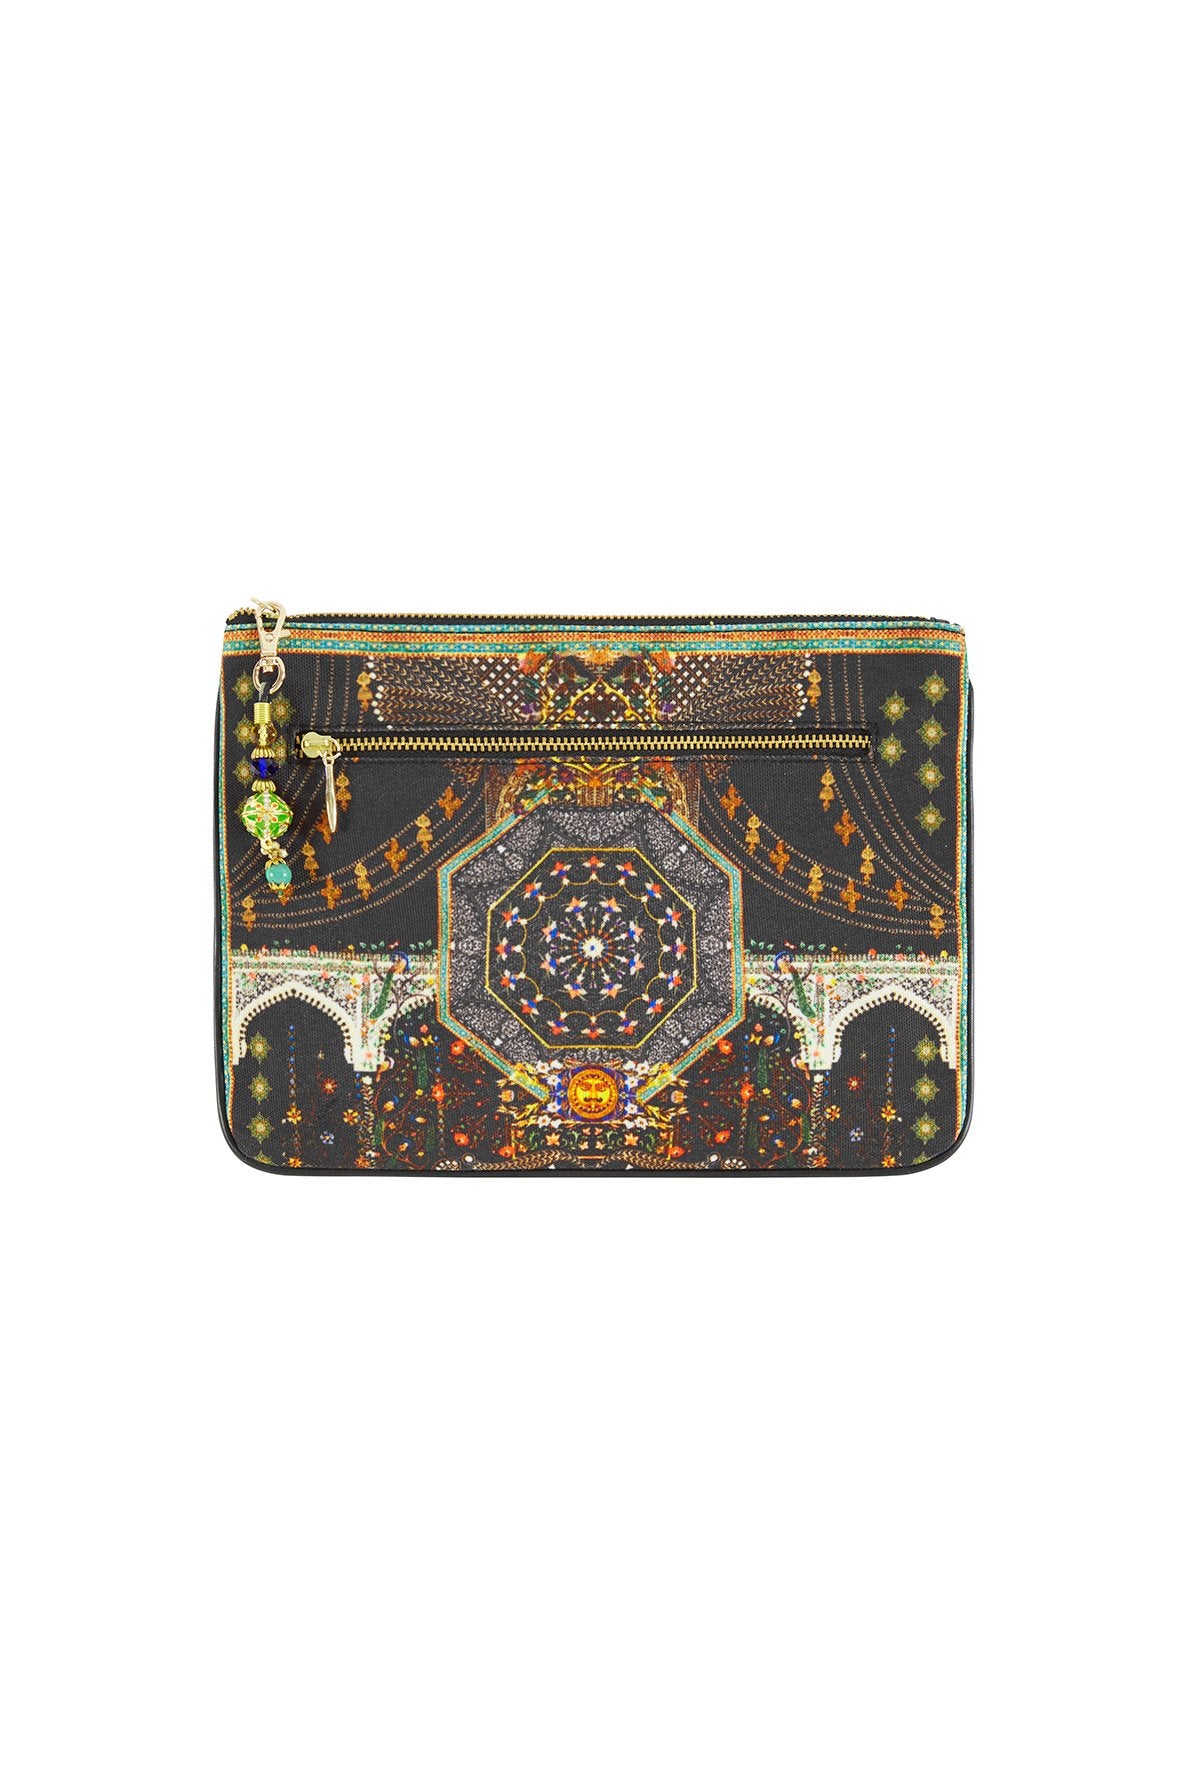 BEHIND CLOSED DOORS SMALL CANVAS CLUTCH